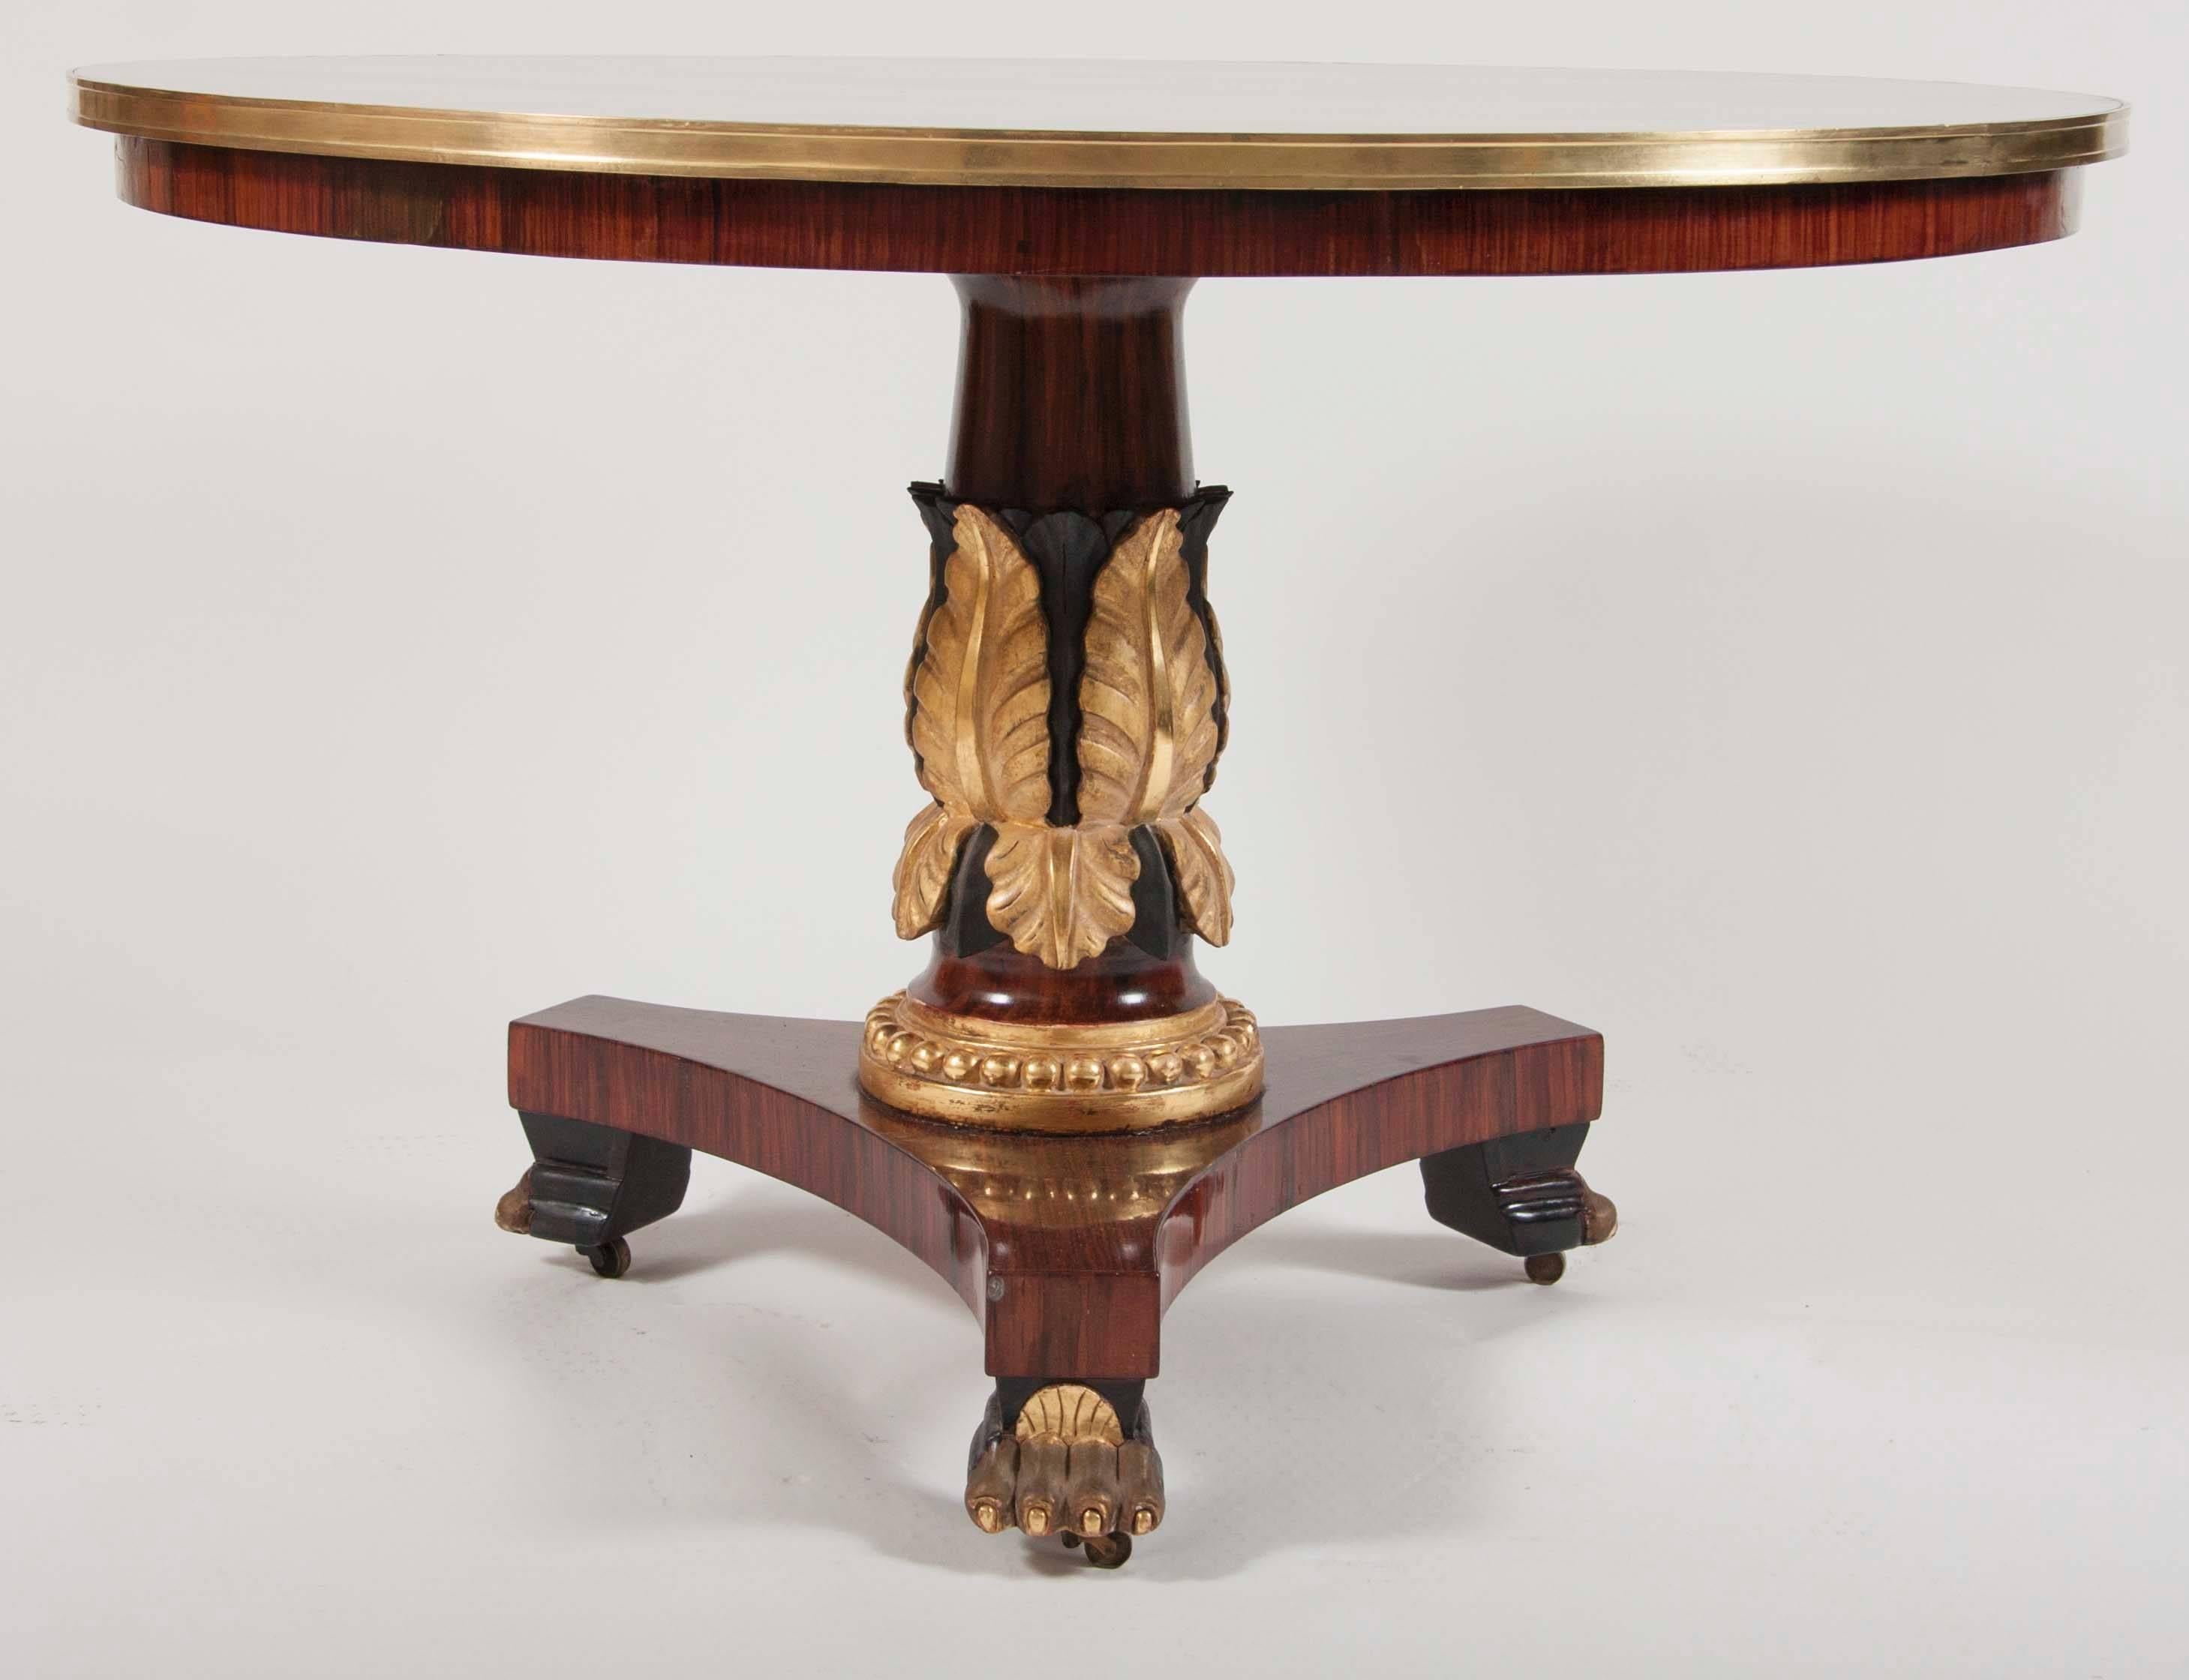 An English Regency mahogany center table with a gilded leaf-carved, pedestal and segmented inlaid top.